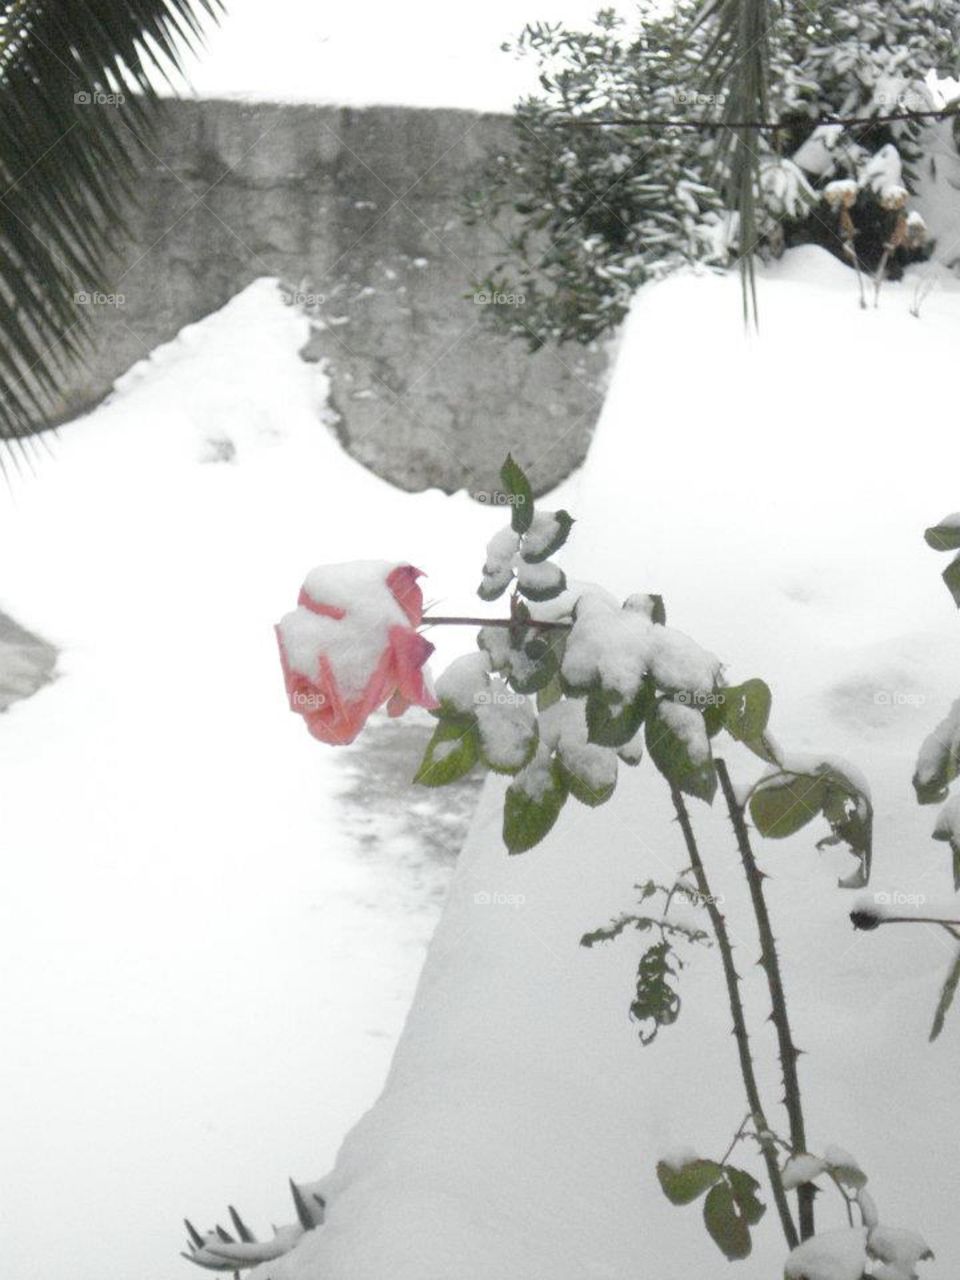 The Rose and the Snow